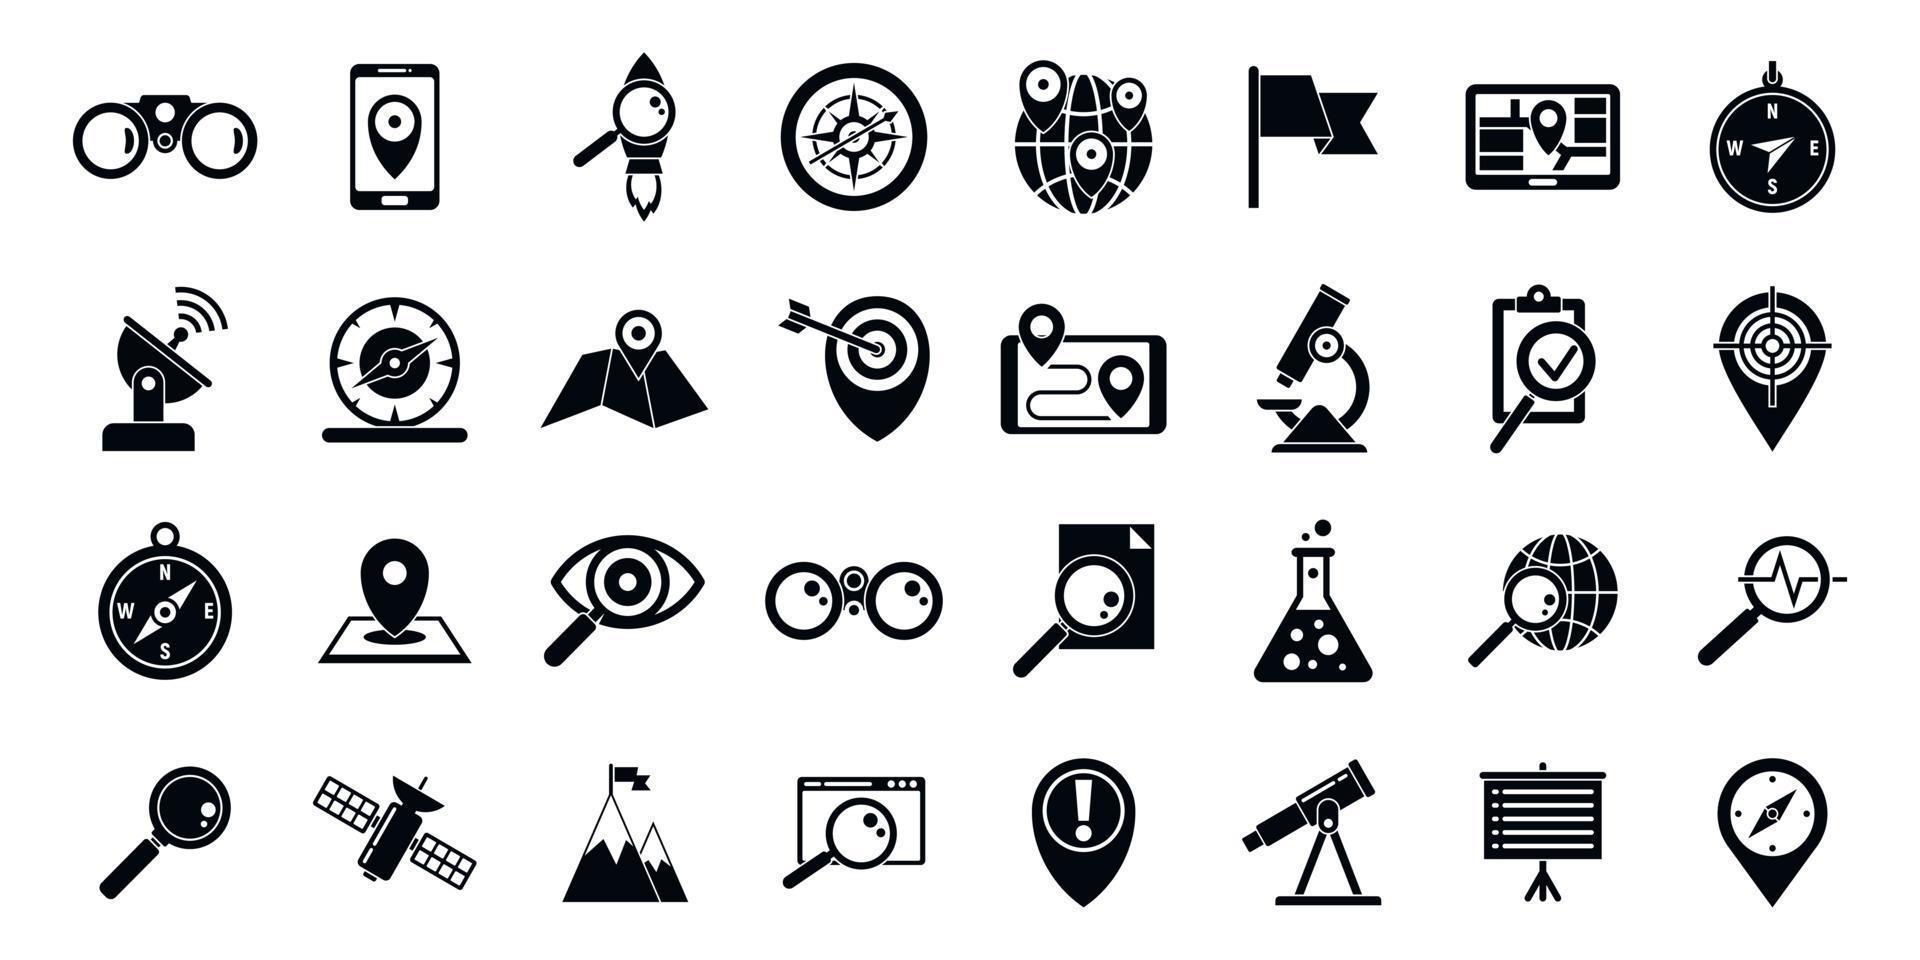 Exploration icons set, simple style vector